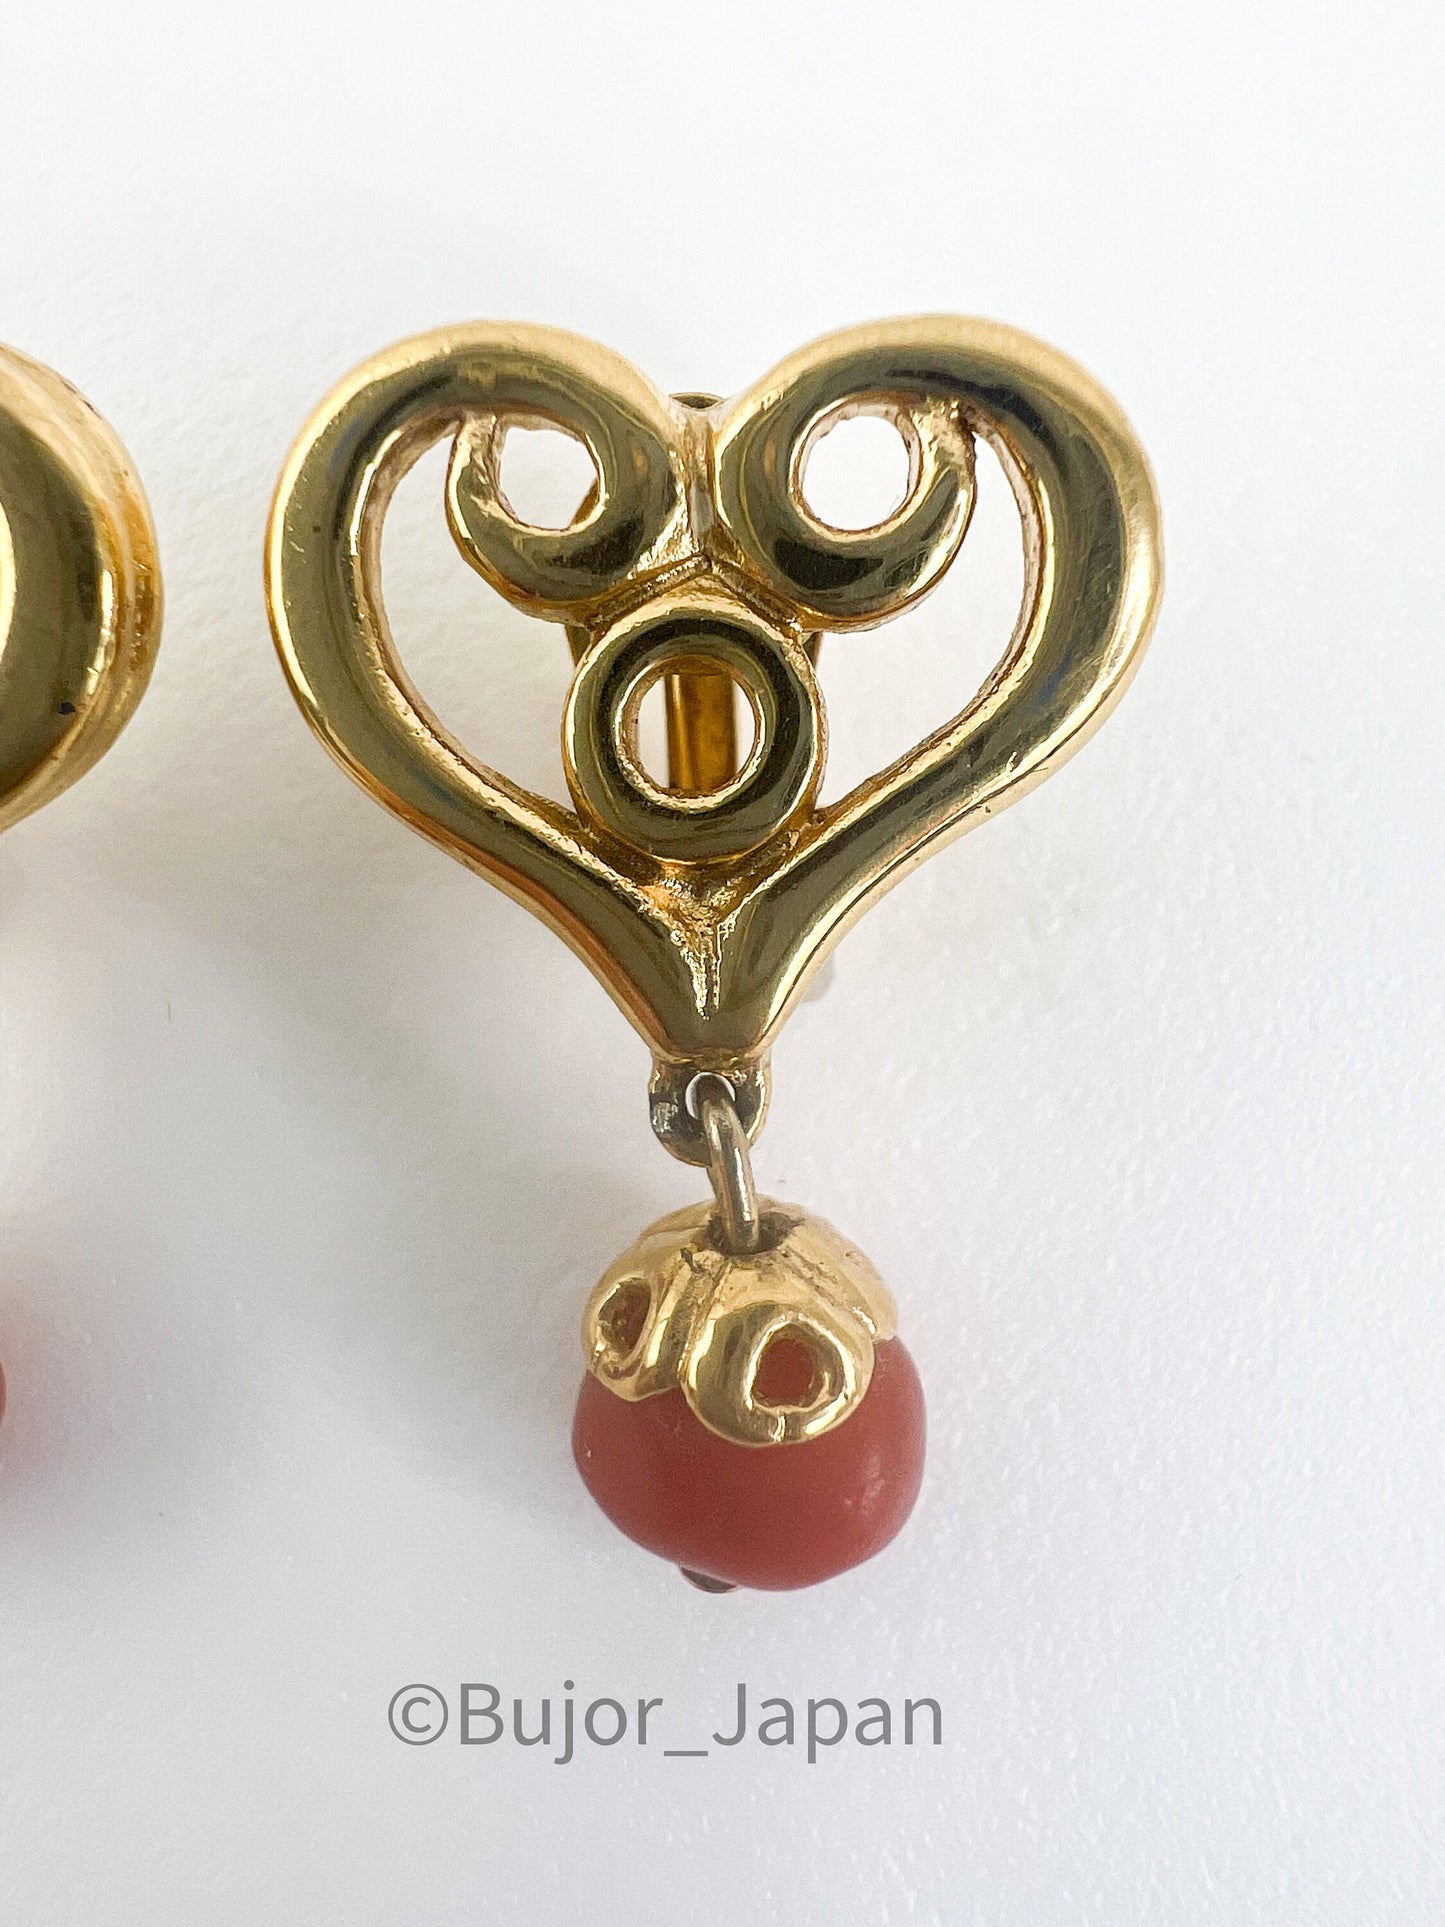 Givenchy Vintage Gold Tone Earrings Heart Charm Dangling Beads